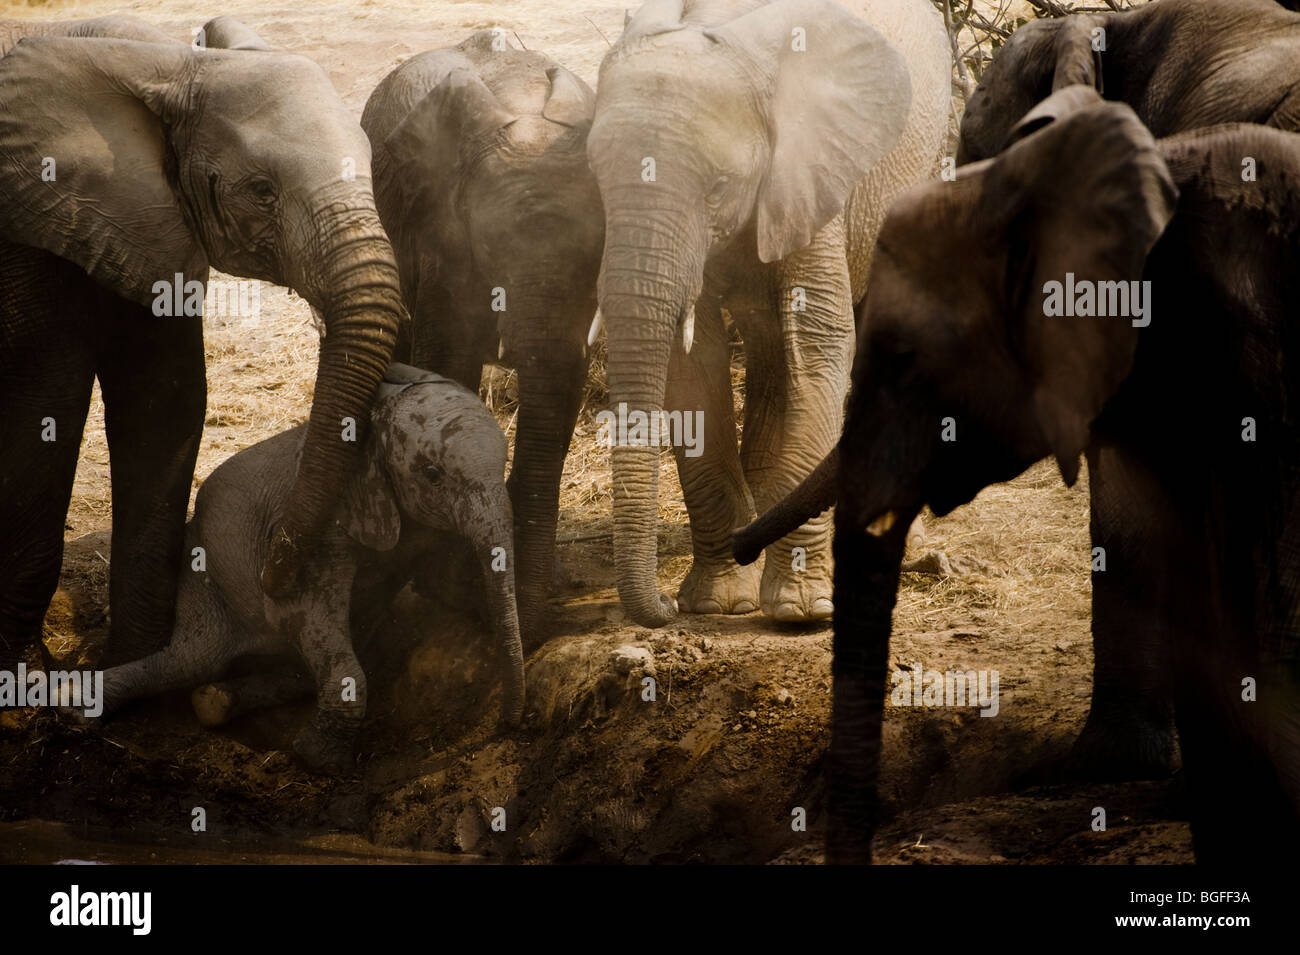 Desert adapted elephants coming to help and protect a young calf at a waterhole, Hobatere, Damaraland, Namibia Stock Photo